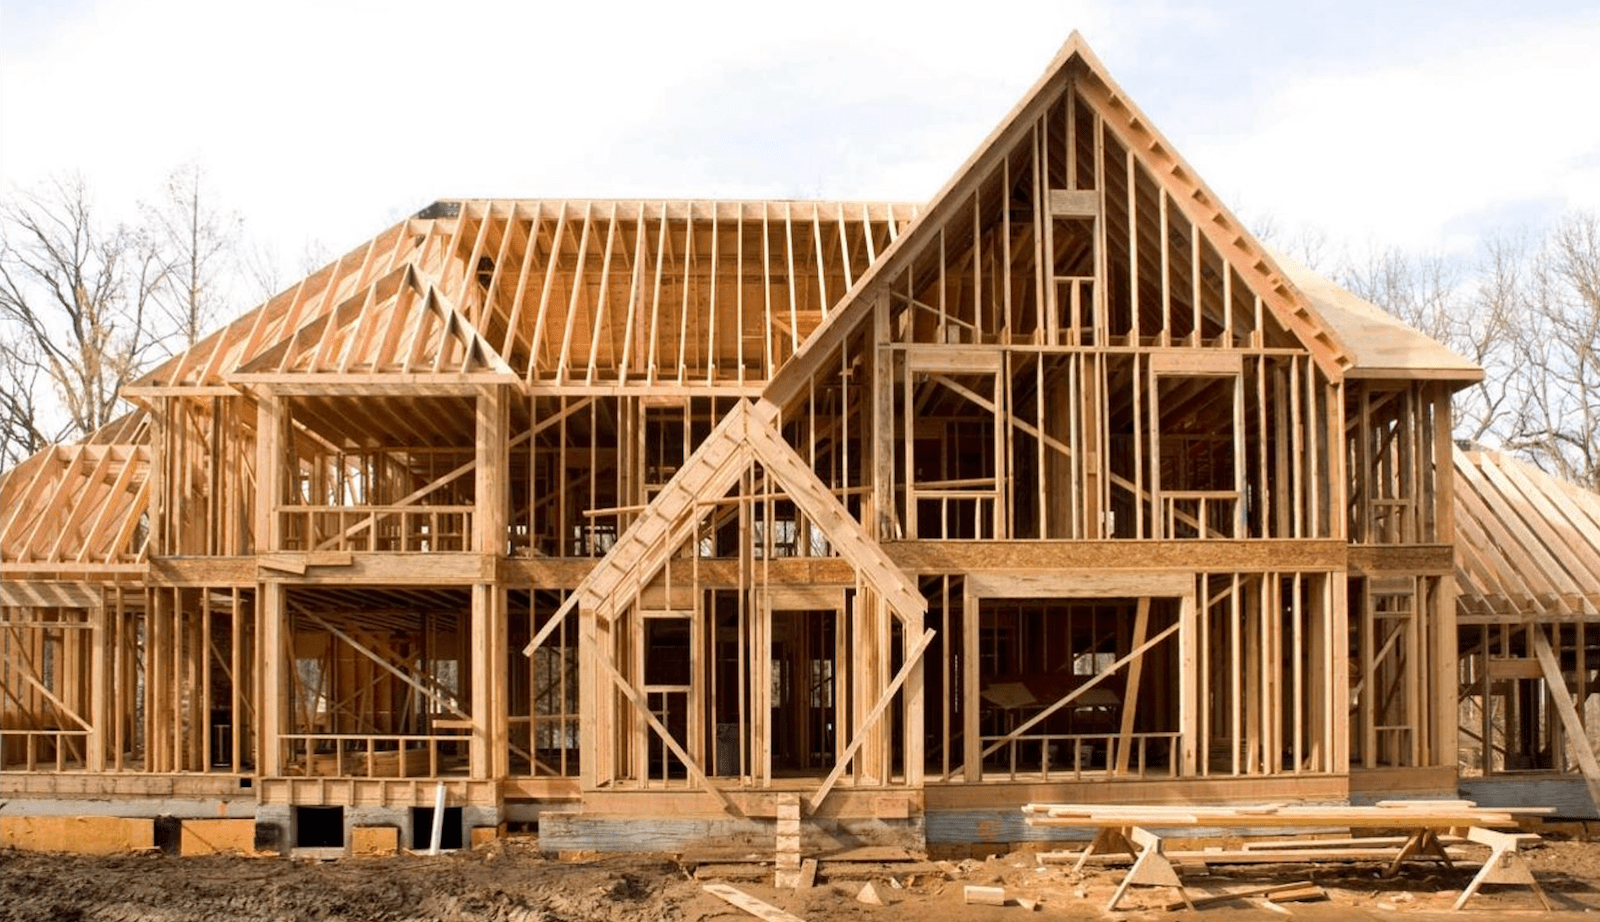 Lean design involves advanced framing to save lumber in home building